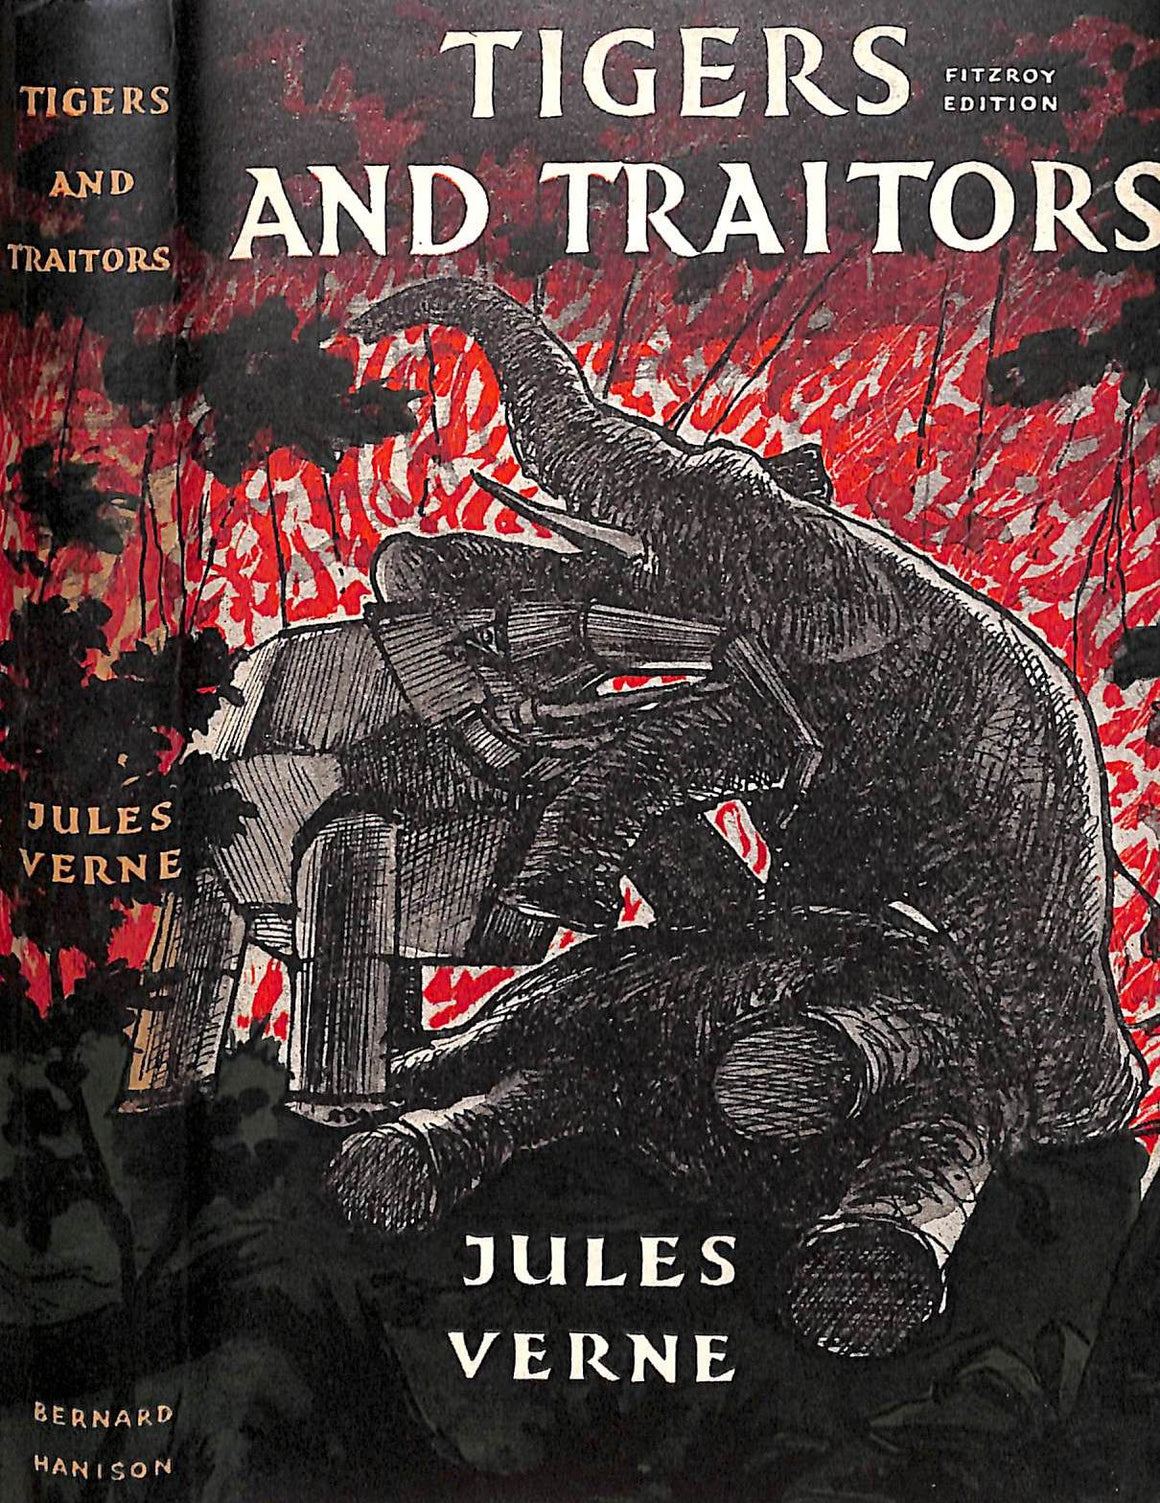 "Tigers And Traitors" 1959 VERNE, Jules